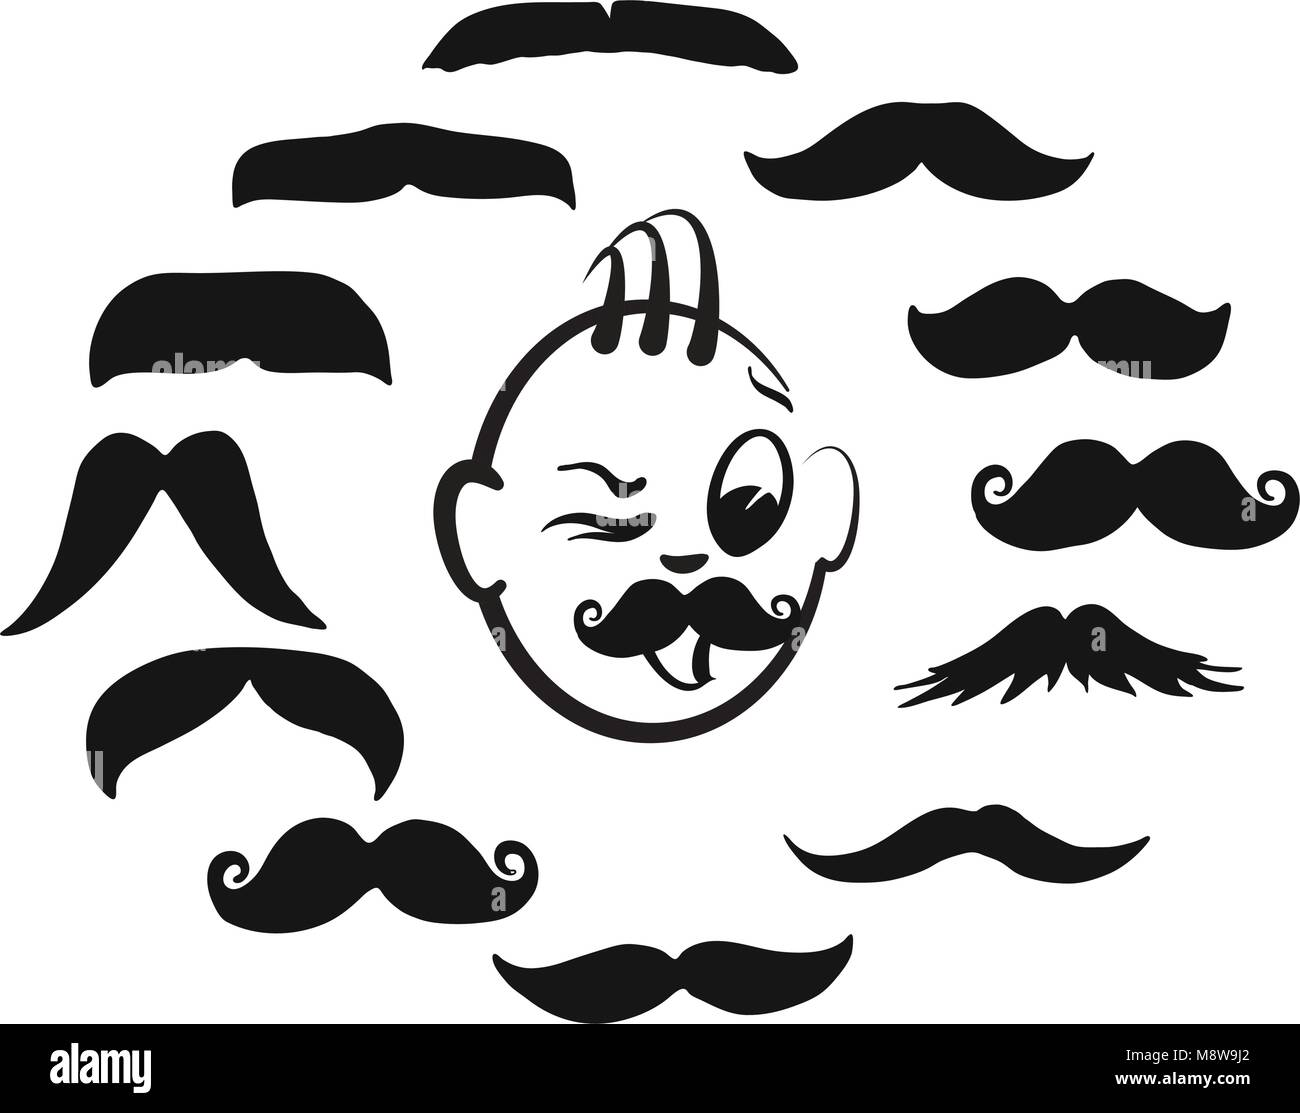 Emotional business icon for digital marketing and print. Stickman series. Stock Vector